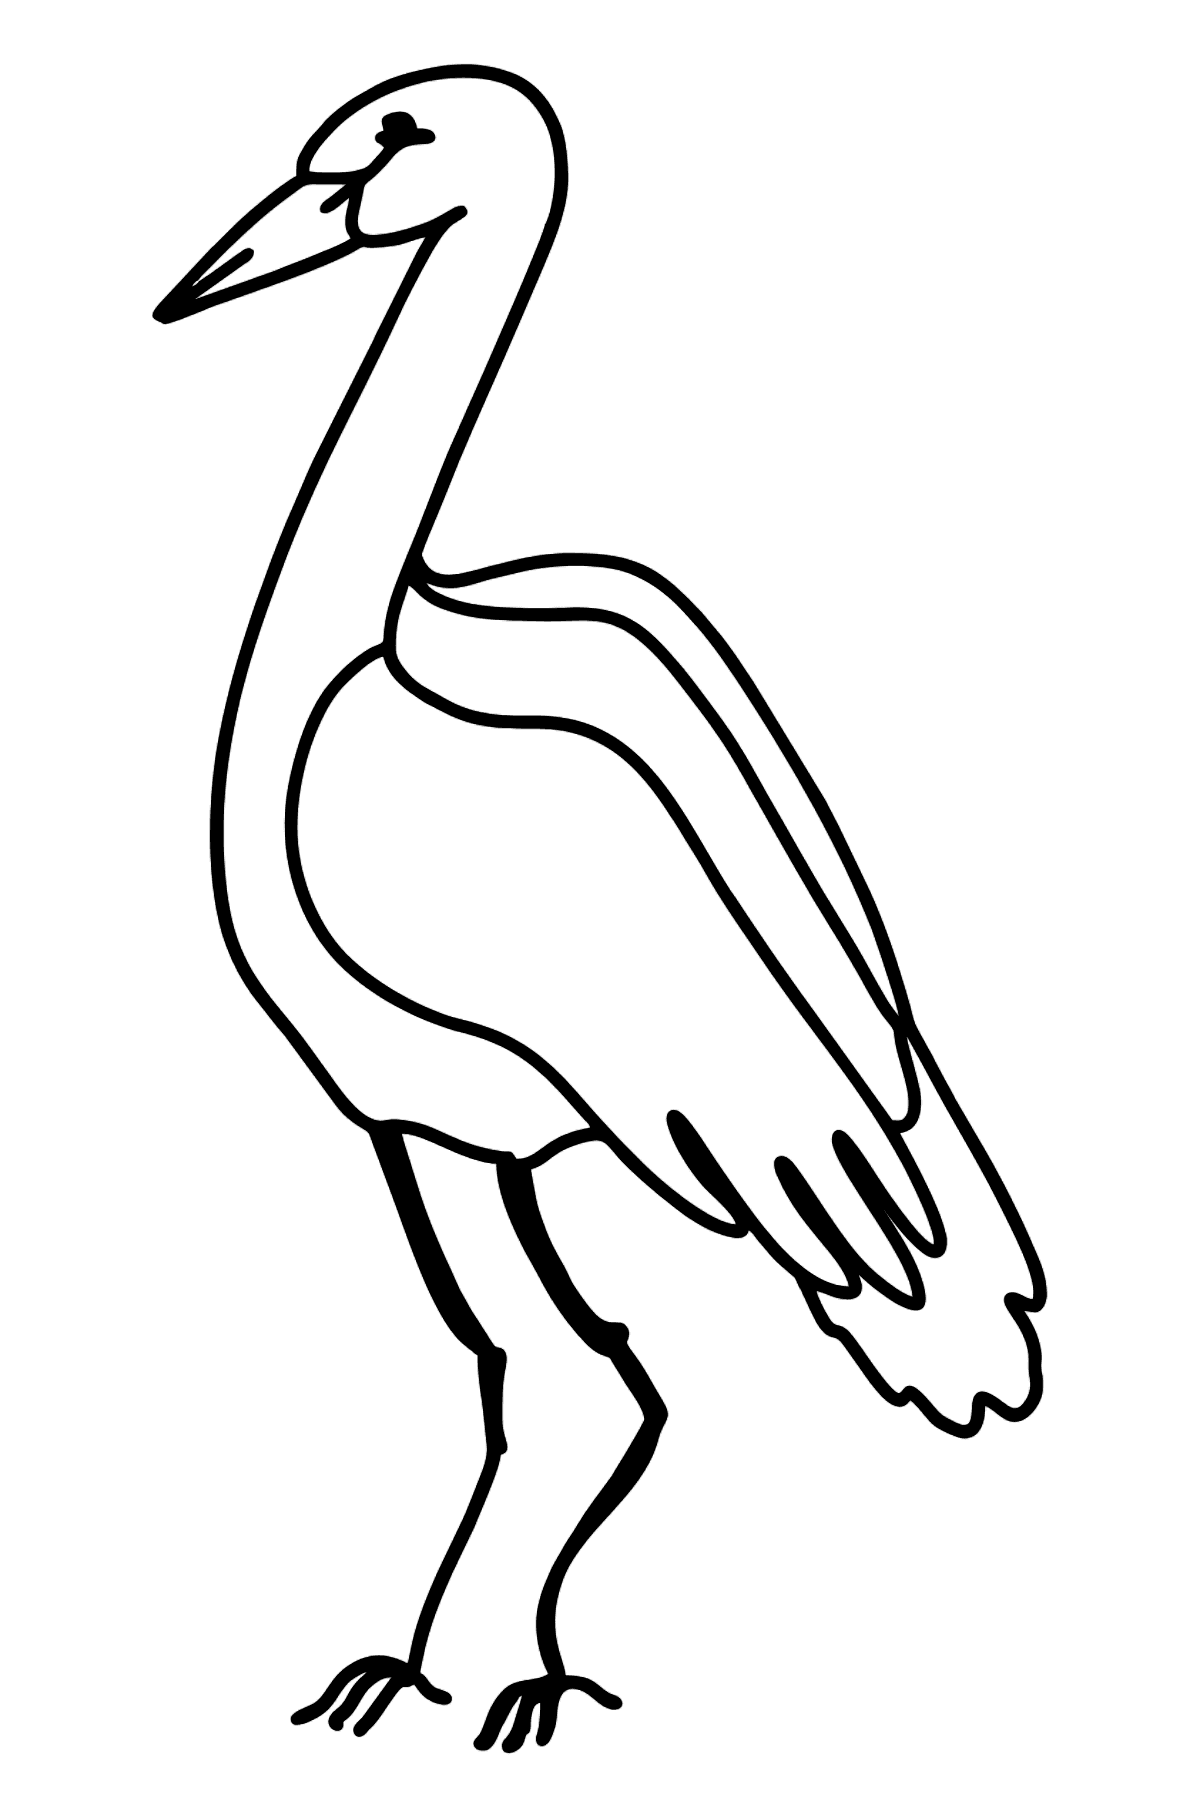 Simple coloring page with a stork  - Coloring Pages for Kids